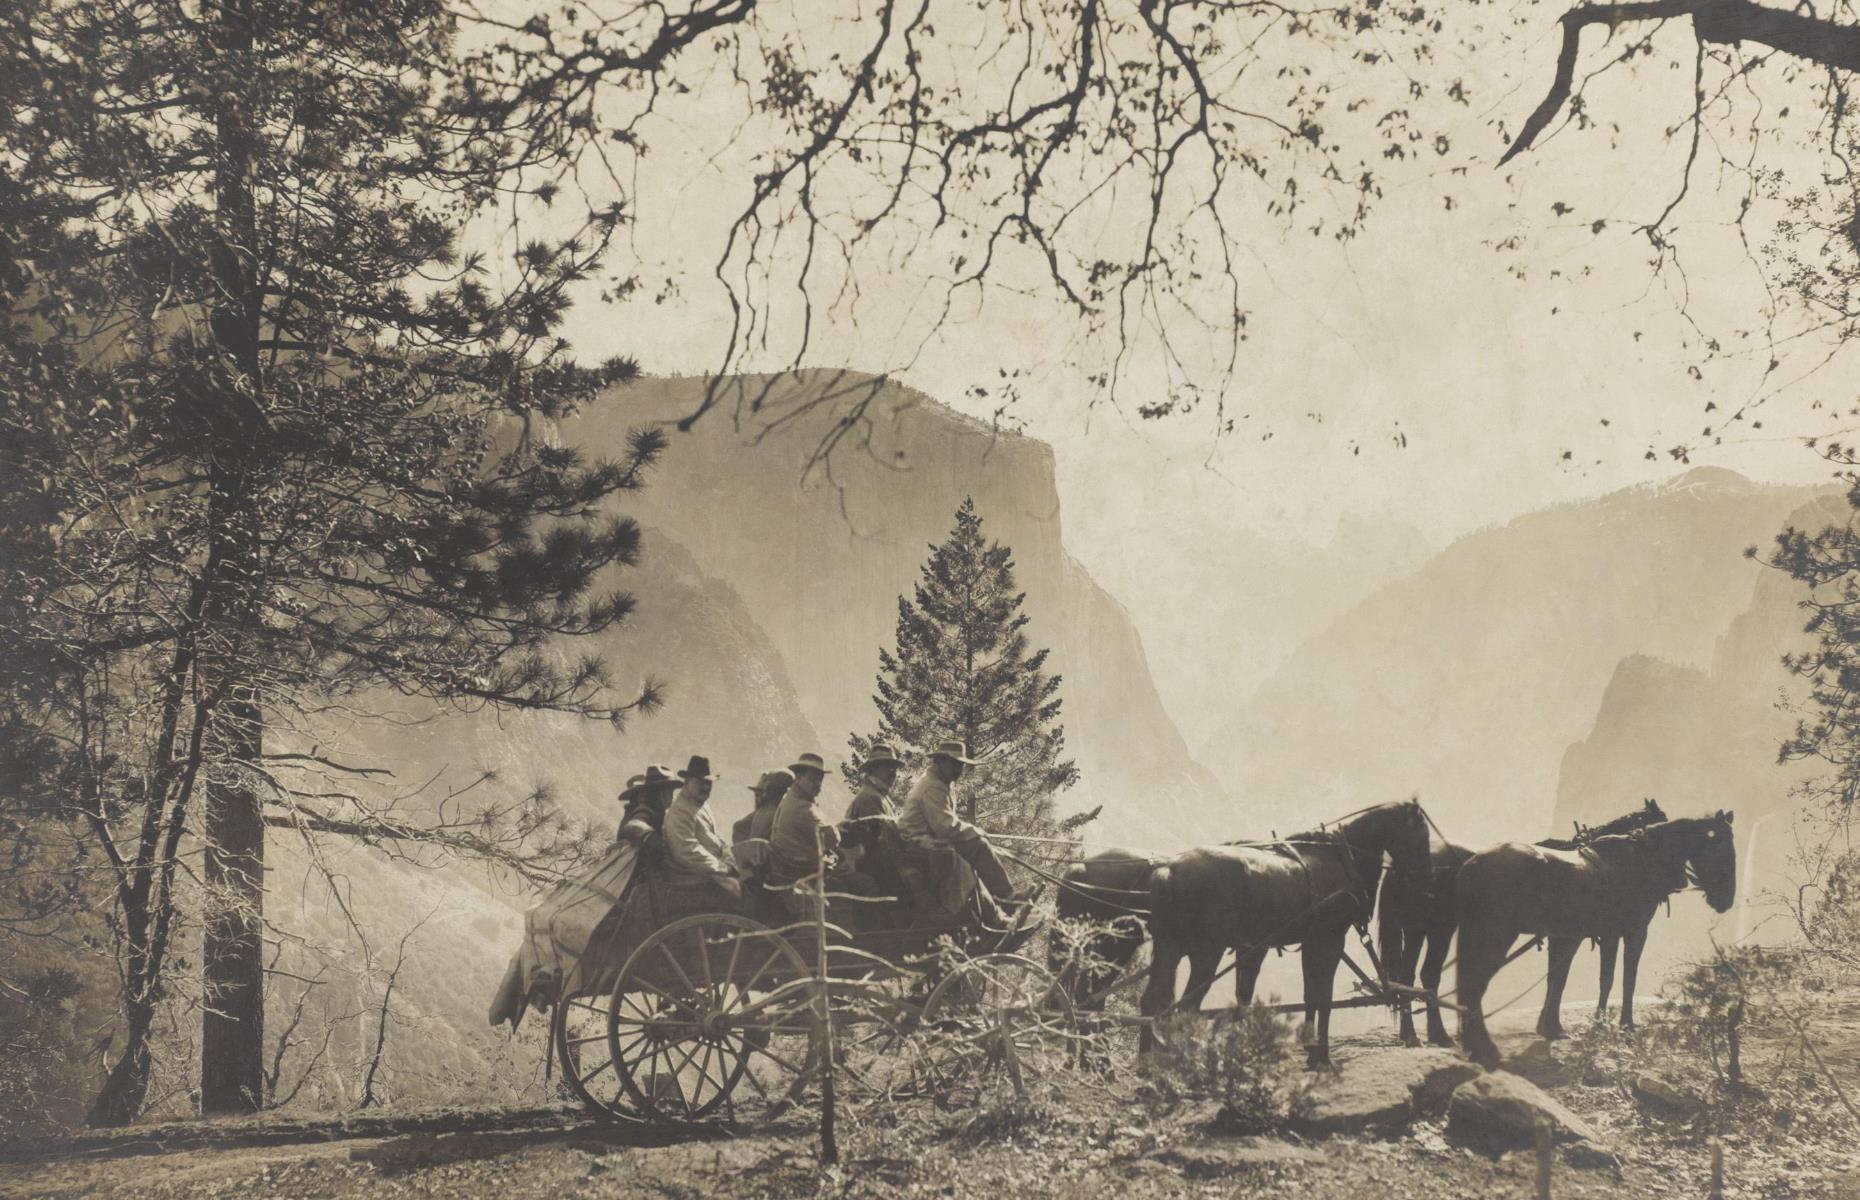 <p>In this photograph, taken in 1903, Theodore Roosevelt visits Inspiration Point in the Yosemite Valley, accompanied by the well-known naturalist John Muir. Parts of the area were established as a State Park in 1864 before a National Park was confirmed in 1890, although it wasn’t until 1906 that the parks were merged to create Yosemite National Park as we know it today. Tourism has risen significantly in the past 75 years: one million people visited the park for the first time in 1954, two million in 1976, and double that amount by the 1990s.</p>